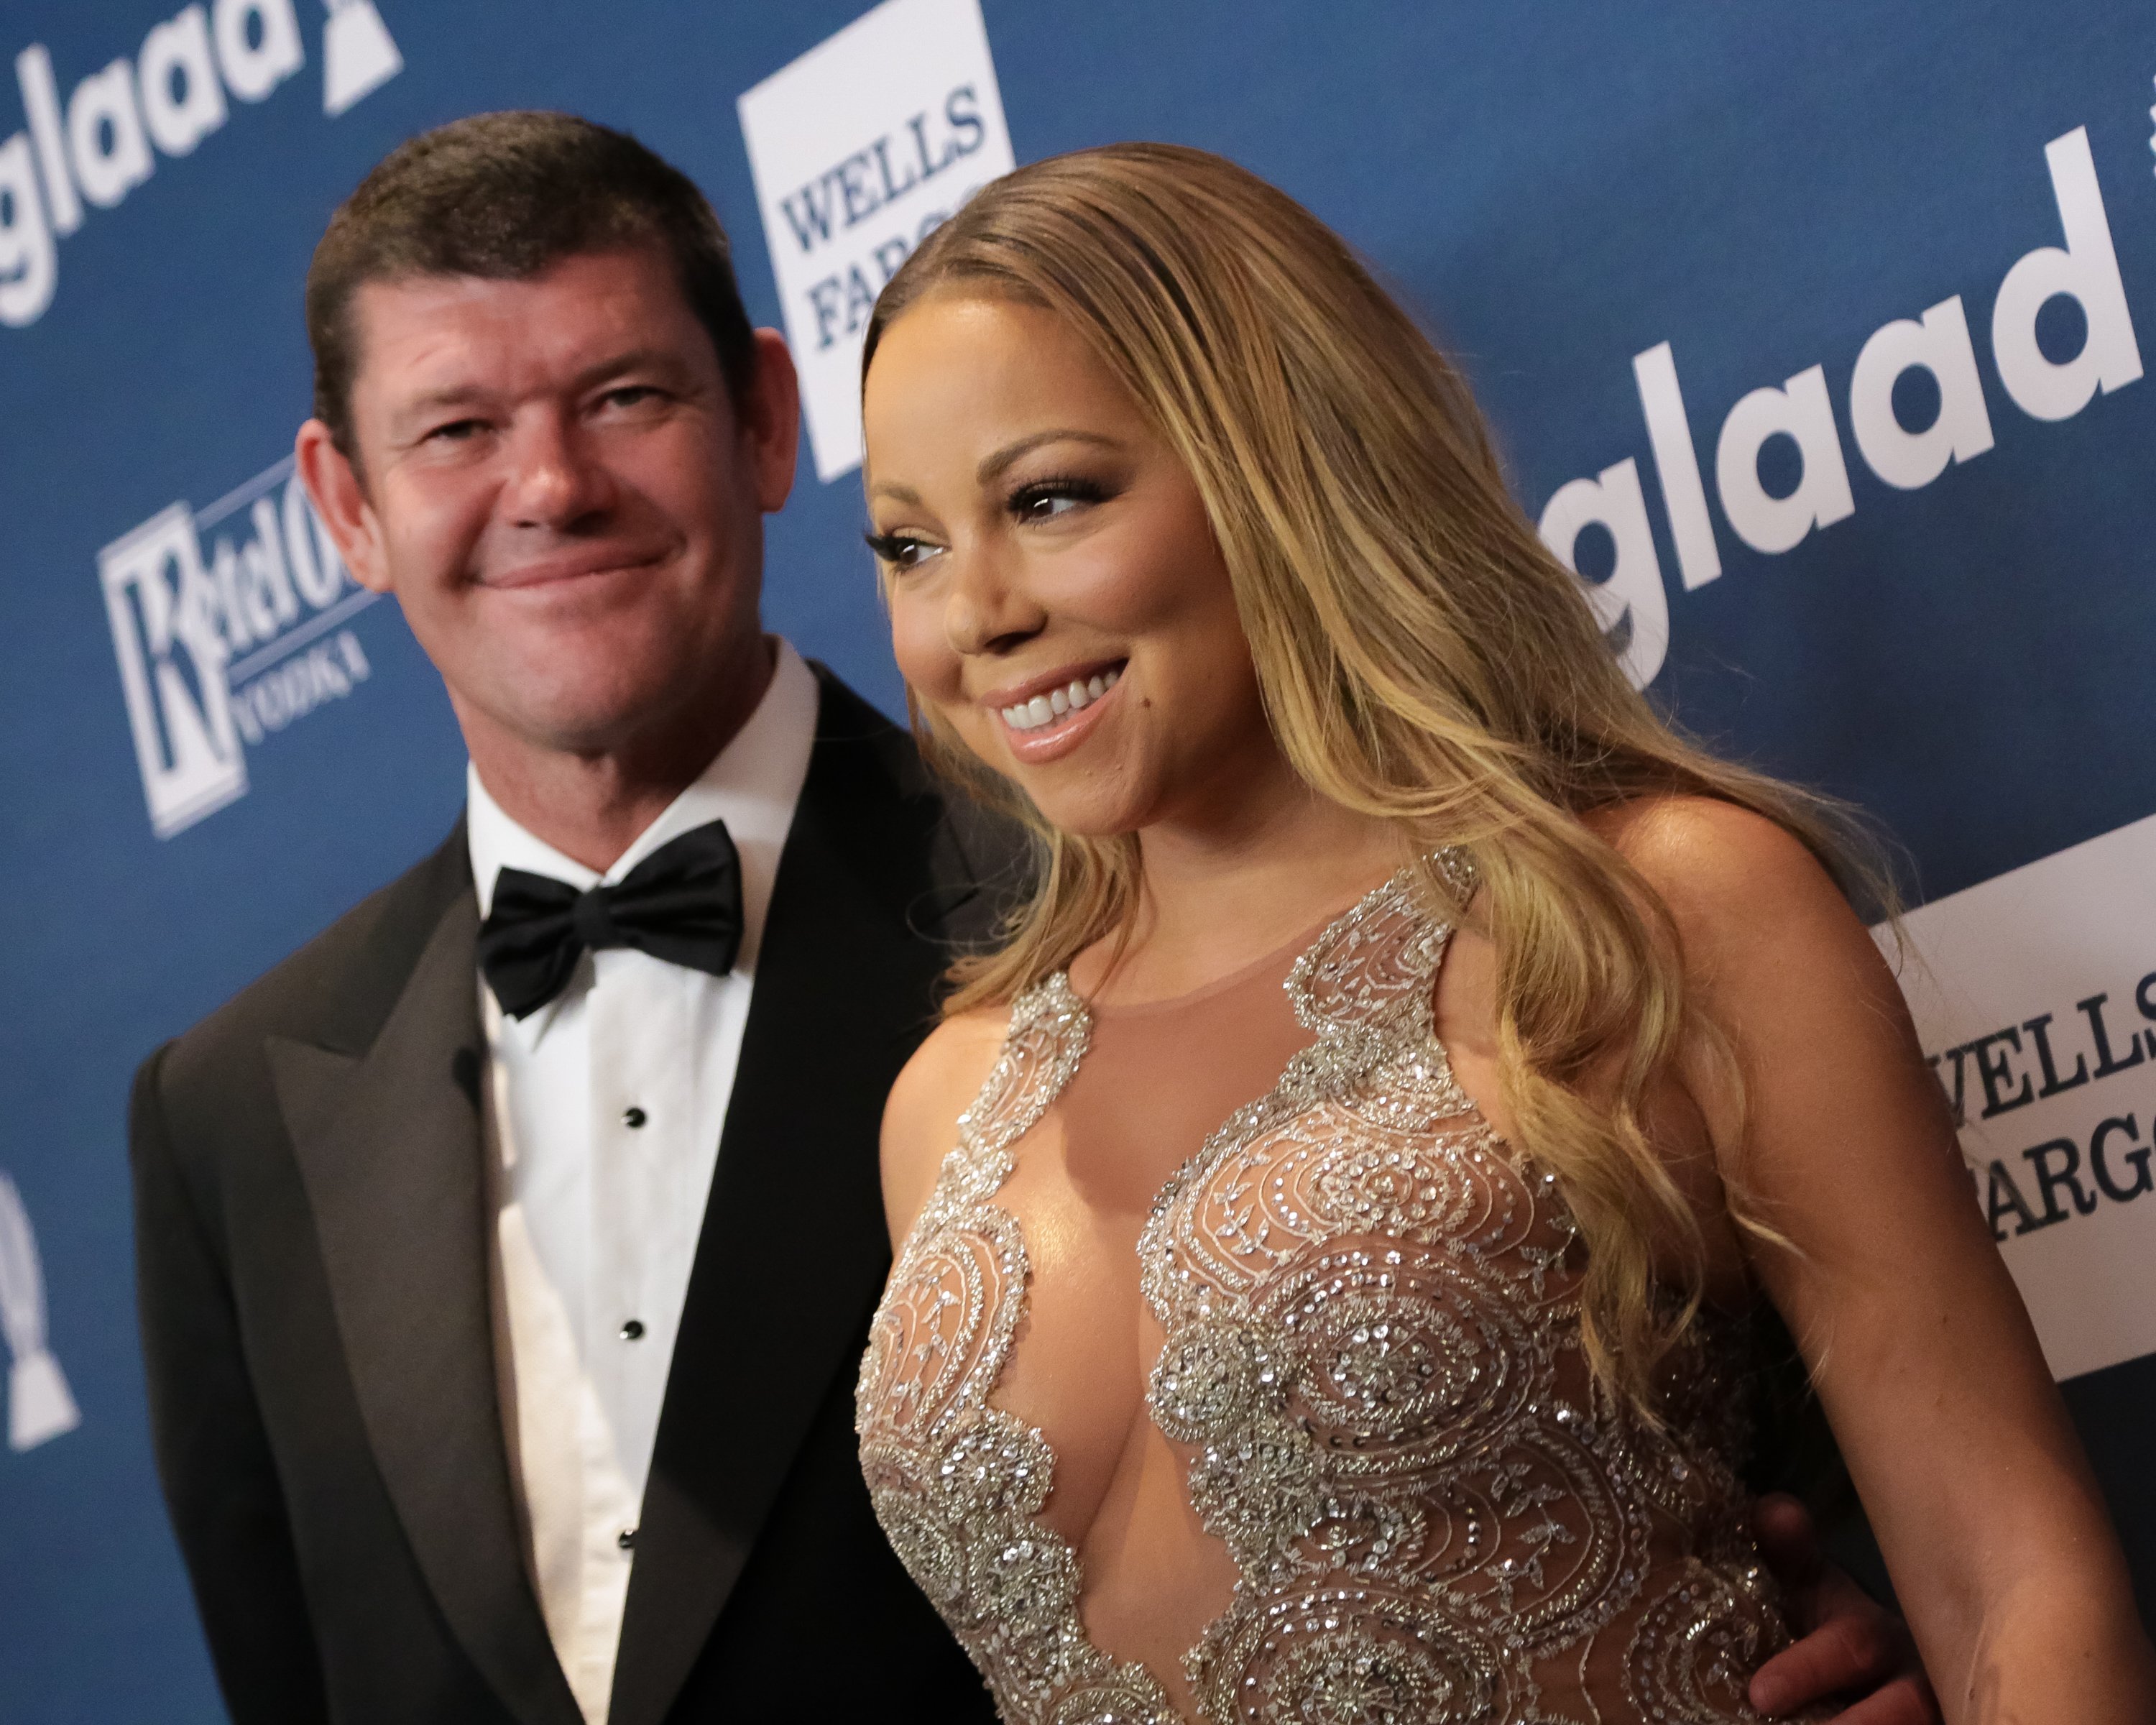 Mariah Carey and businessman James Packer attend the 27th Annual GLAAD Media Awards held at The Waldorf=Astoria on May 14, 2016 in New York City. | Source: Getty Images